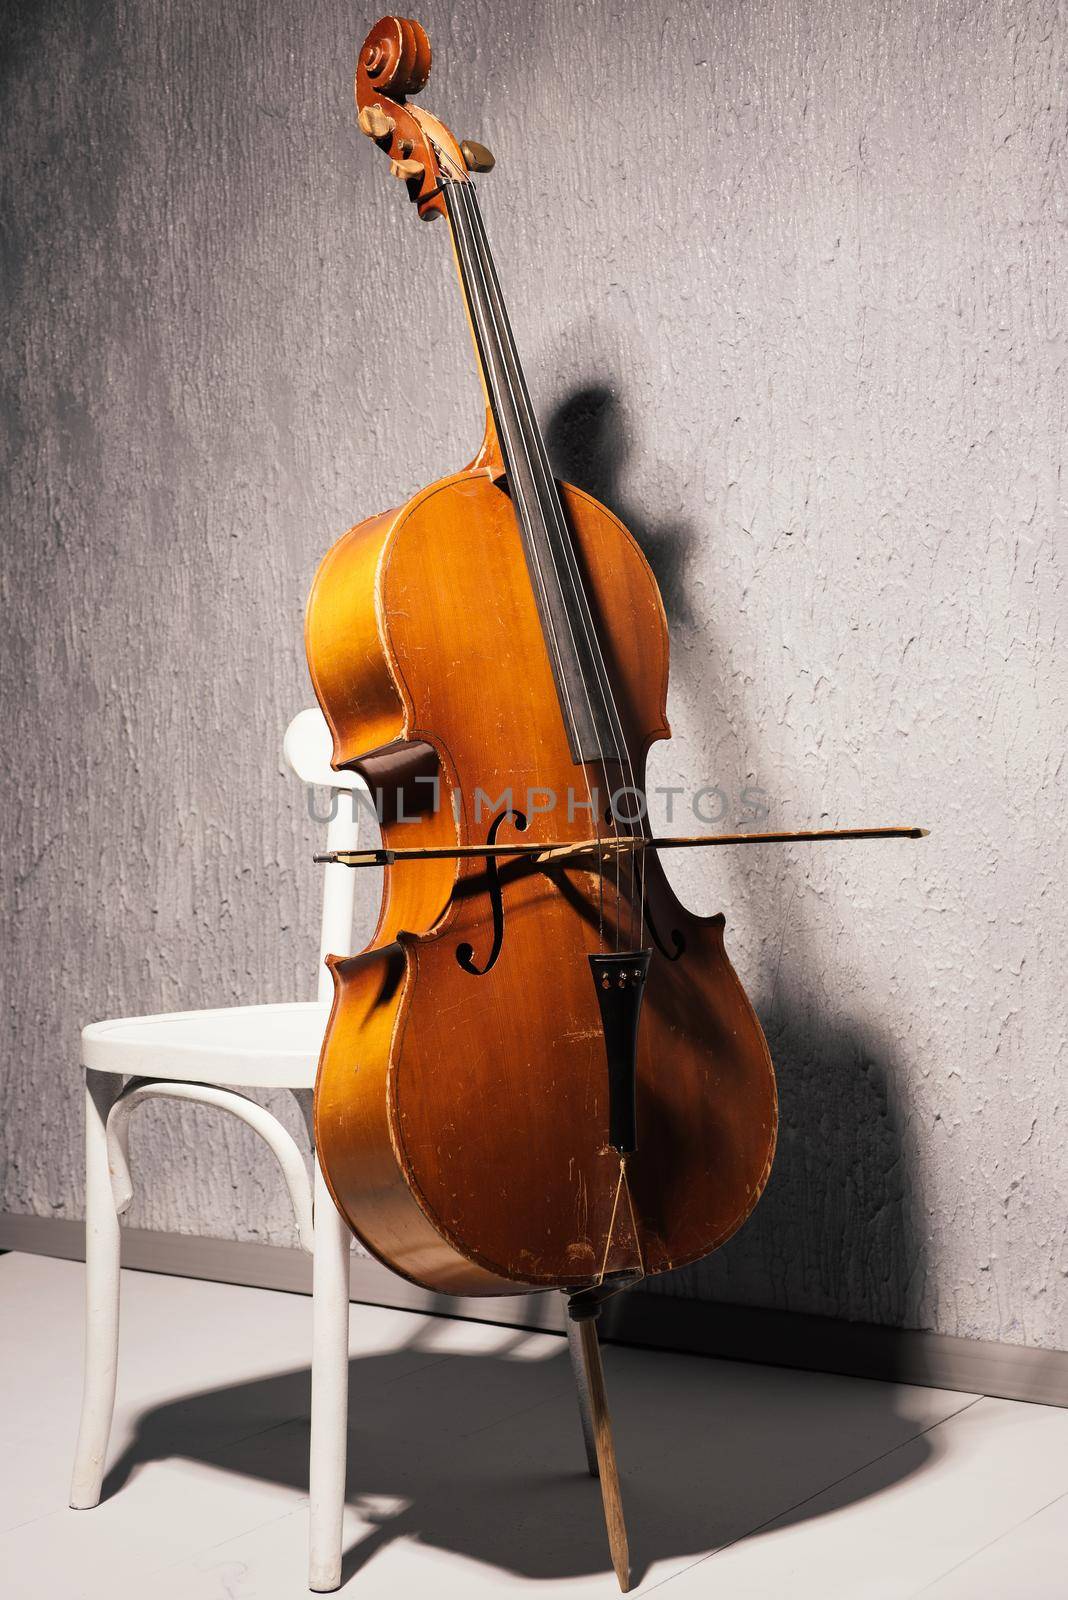 Violin on chair at school or practice room ,During the practice break time to prepare For the concert.